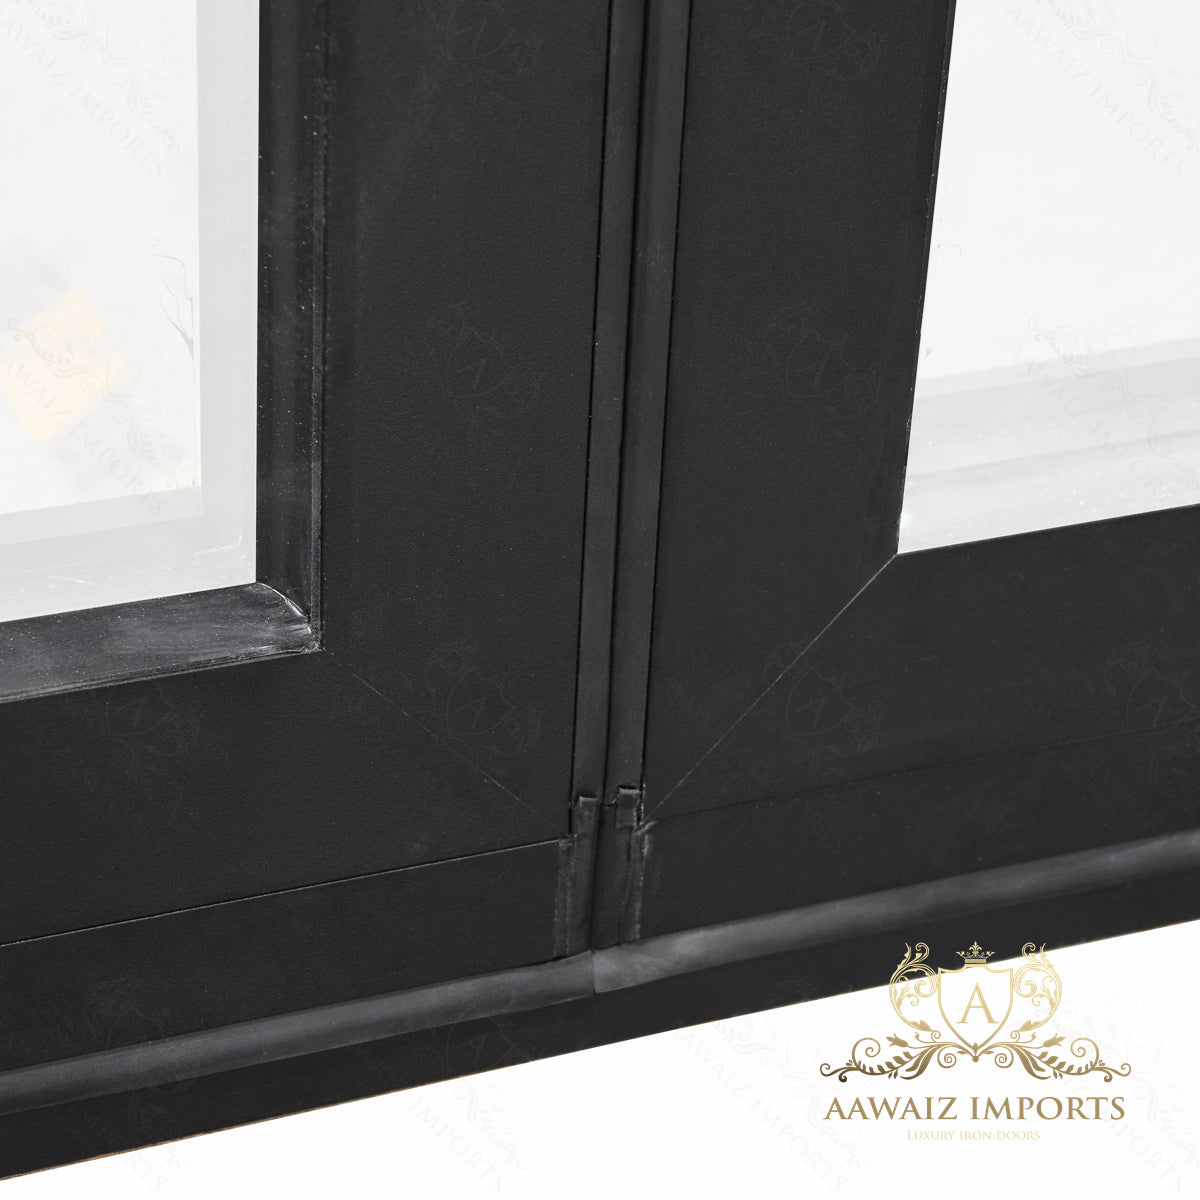 9 Ft Wide By 8 Ft Tall (108" By 96") Aluminum Bi Fold Patio Door  Outswing  Thermal Break Insulated Matt Black Finish